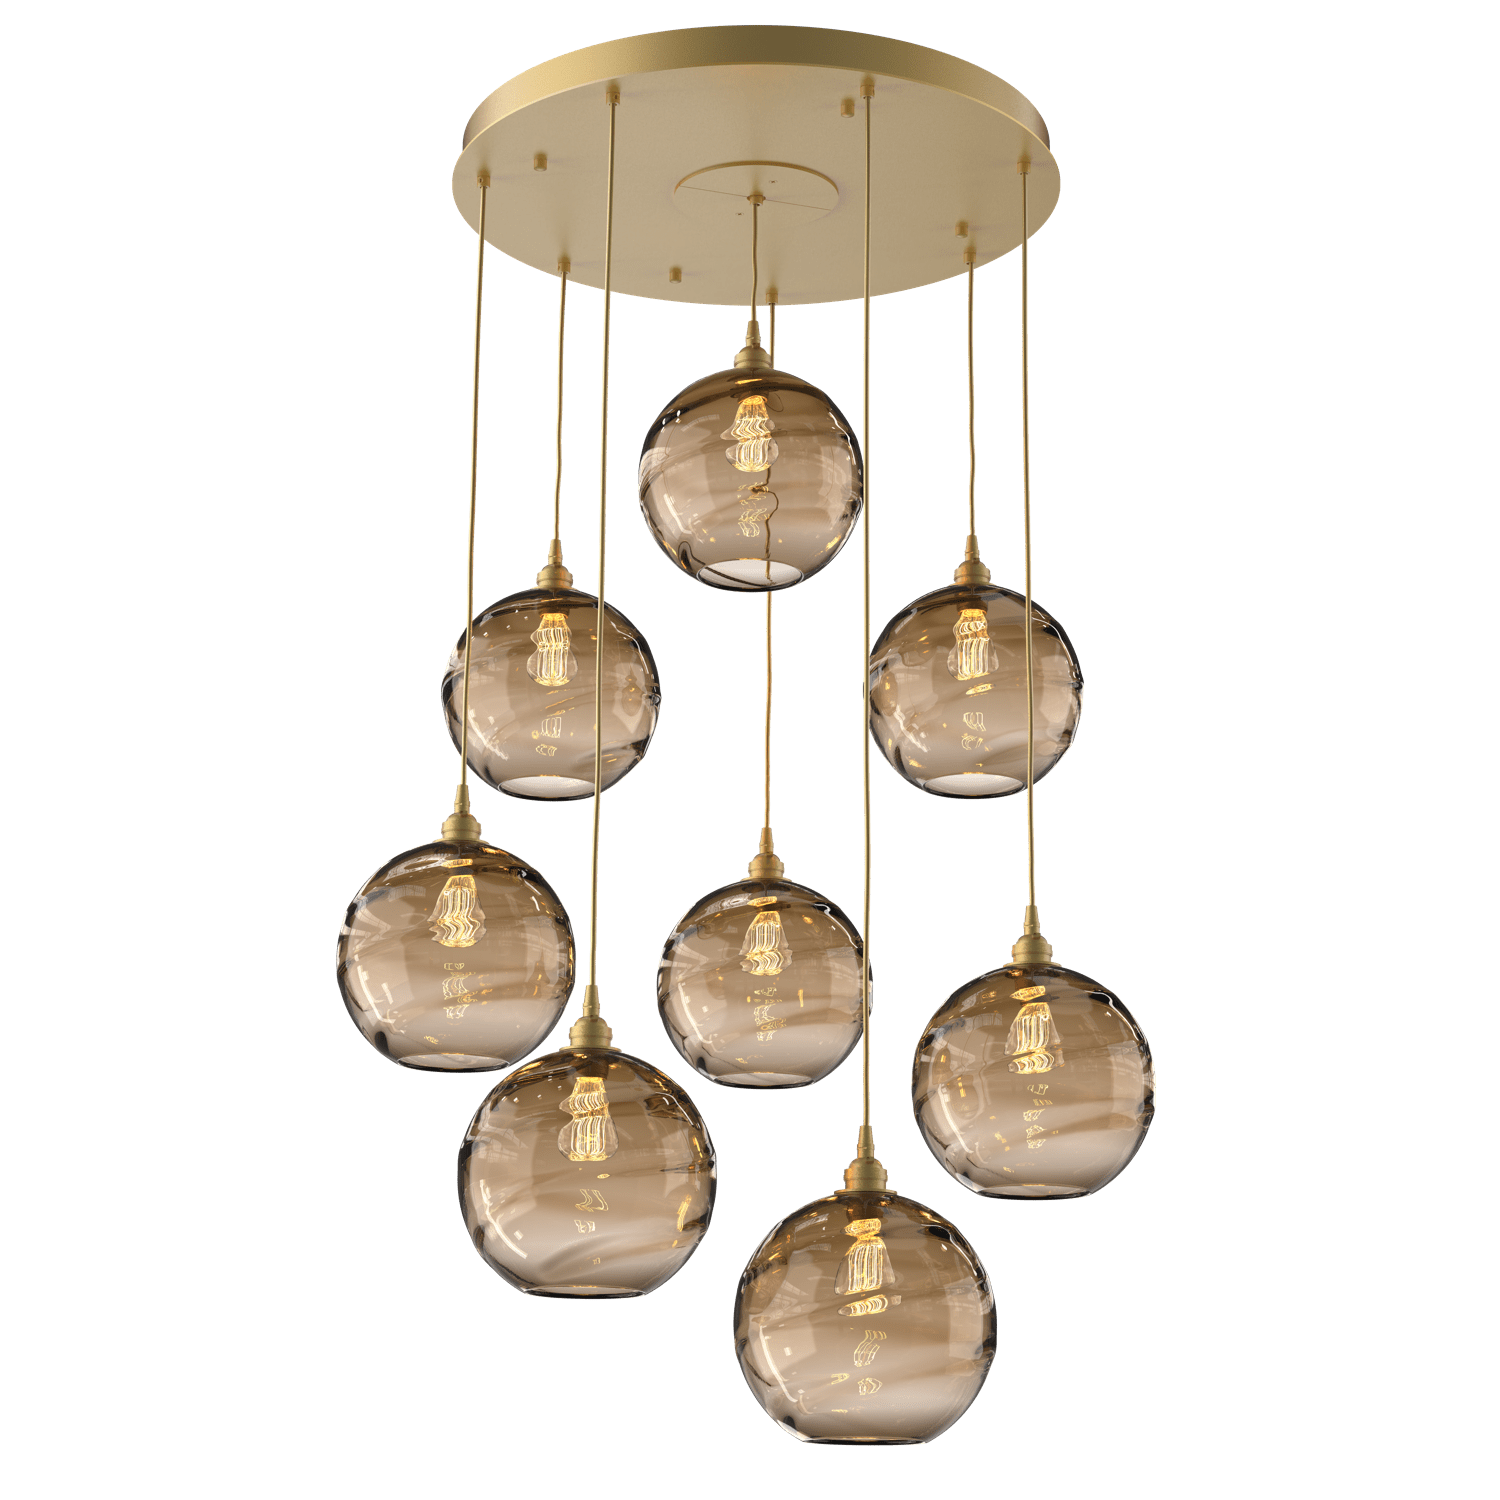 CHB0047-08-GB-OB-Hammerton-Studio-Optic-Blown-Glass-Terra-8-light-round-pendant-chandelier-with-gilded-brass-finish-and-optic-bronze-blown-glass-shades-and-incandescent-lamping